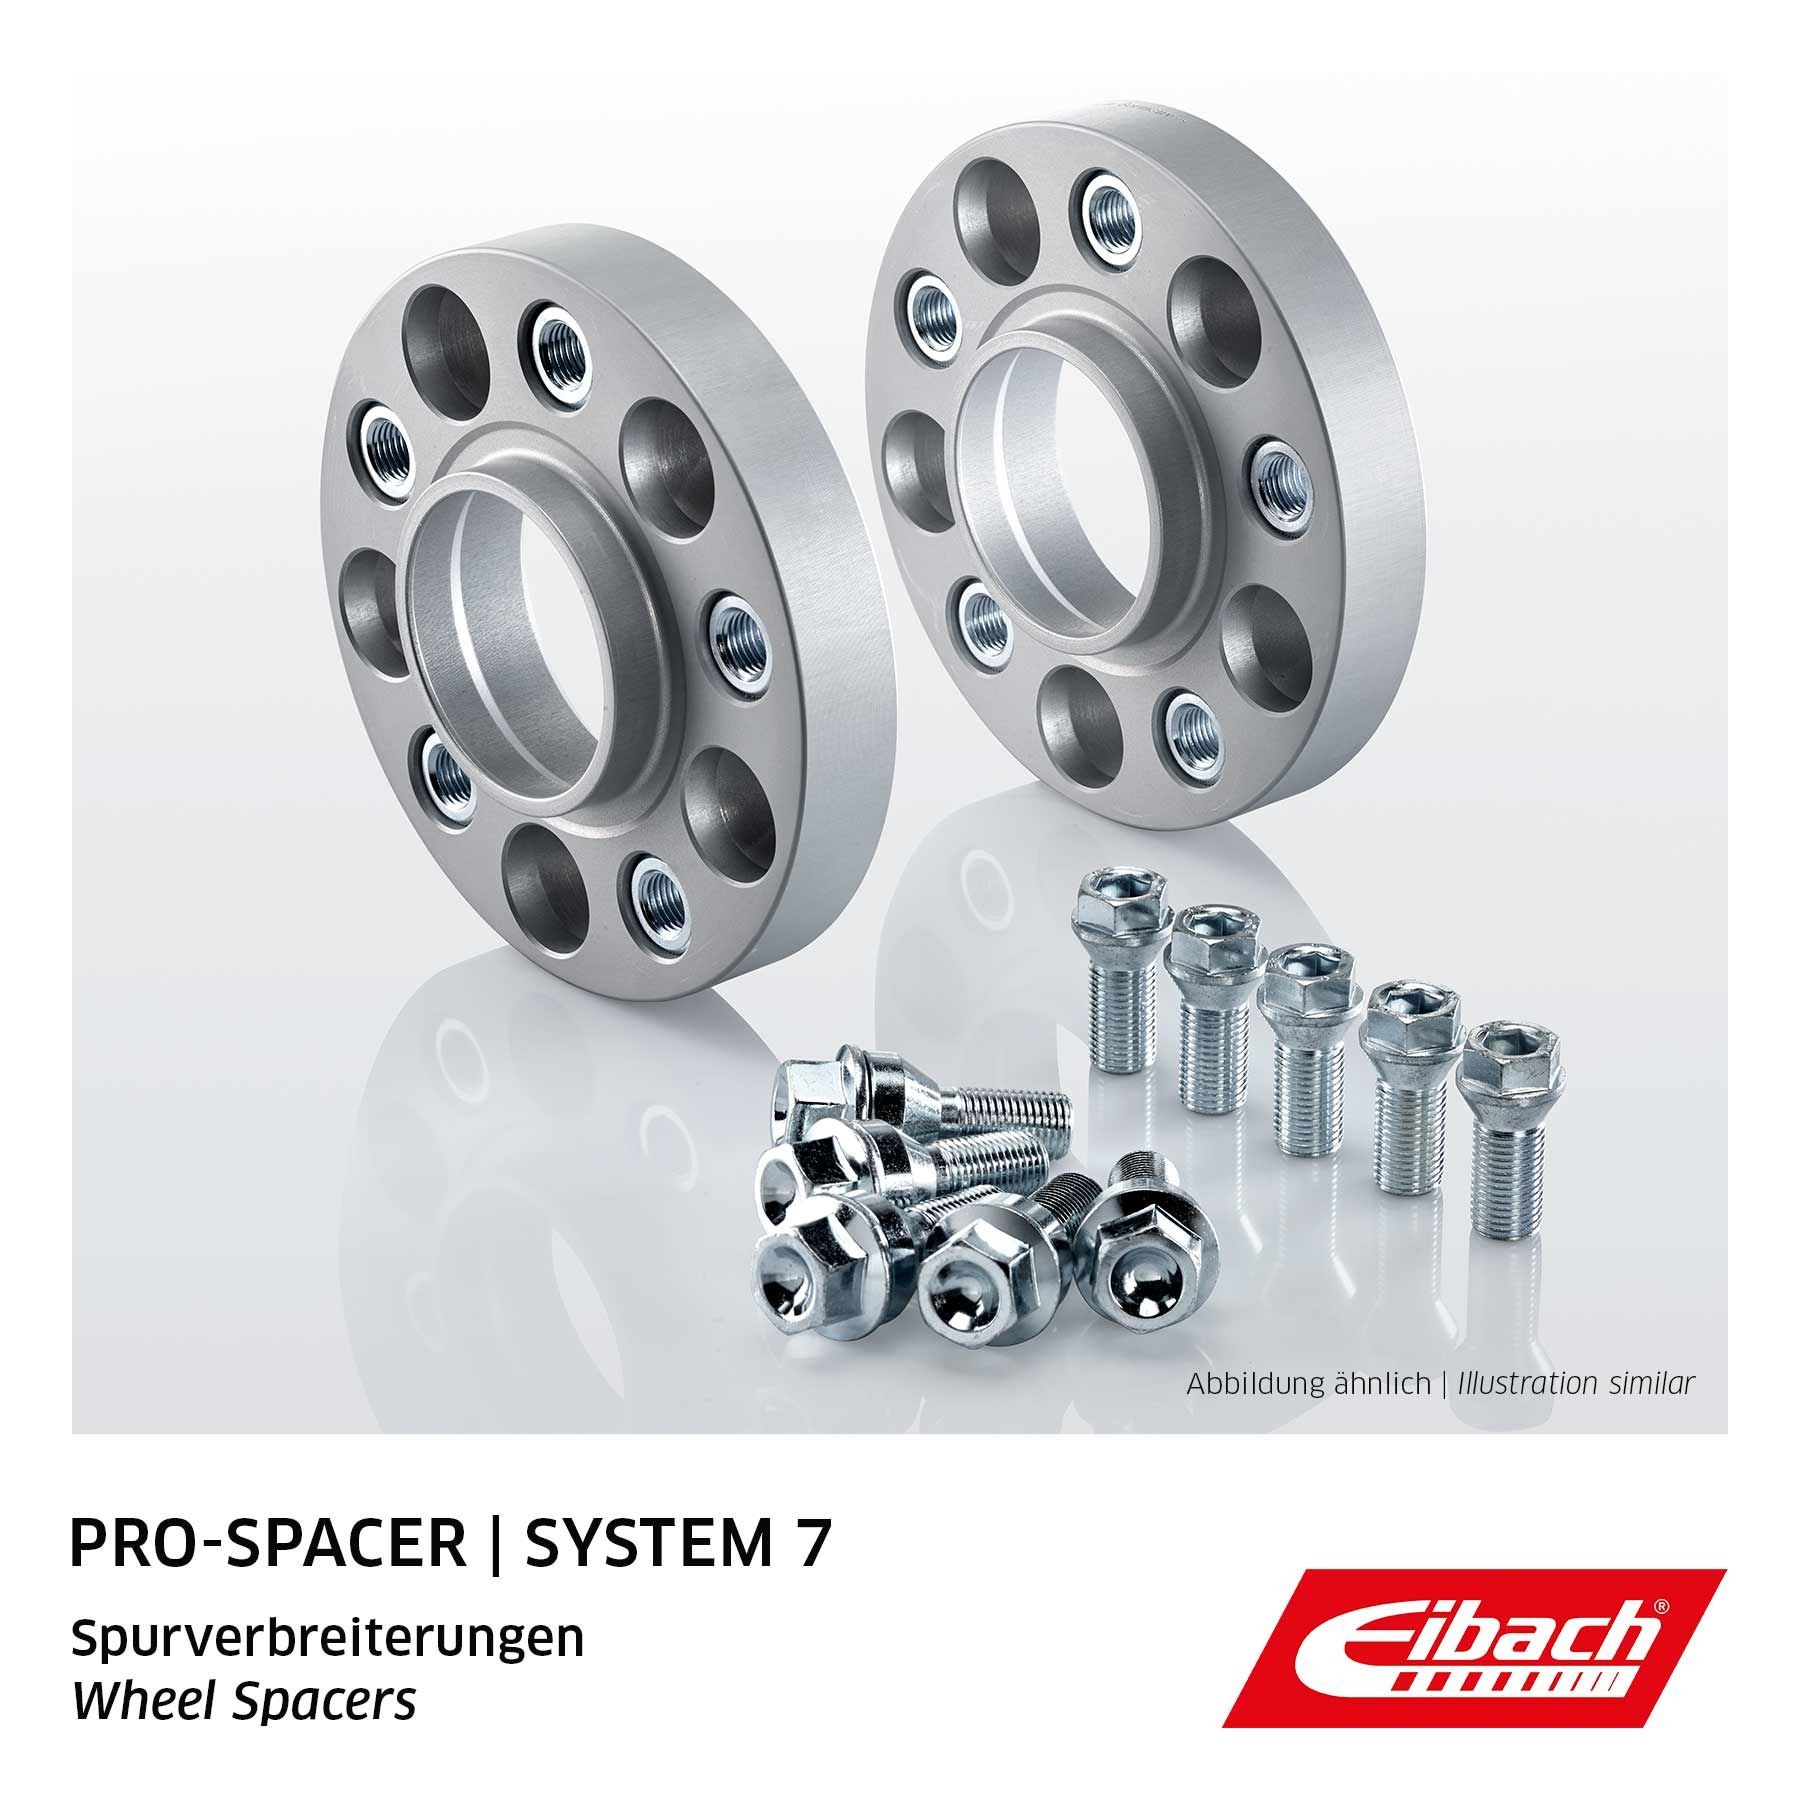 Great value for money - EIBACH Wheel spacer S90-7-20-043